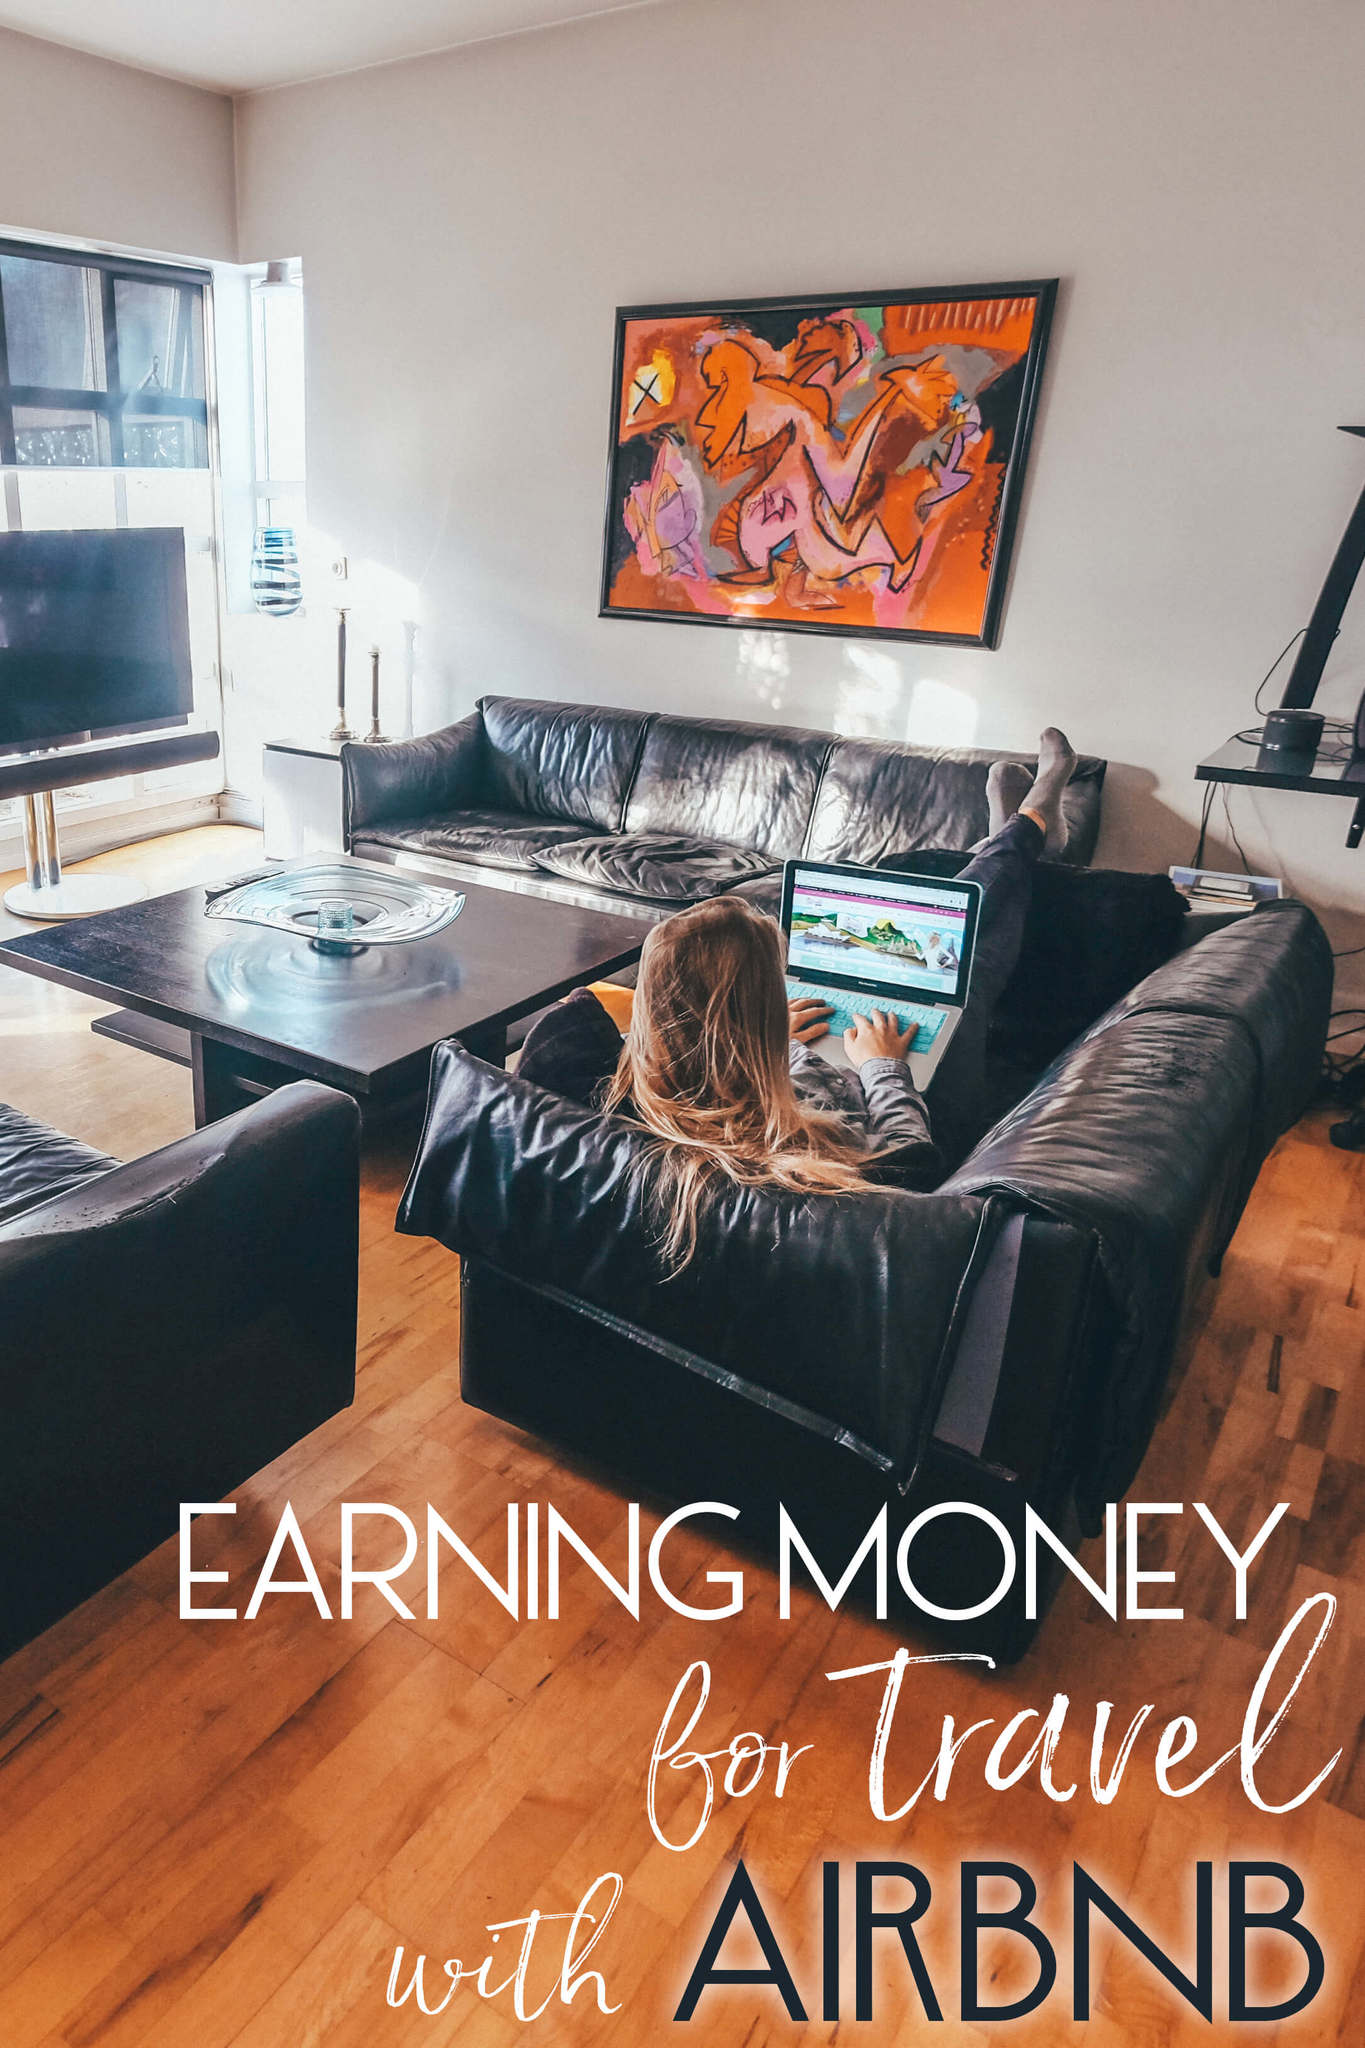 Earning Money for Travel with Airbnb